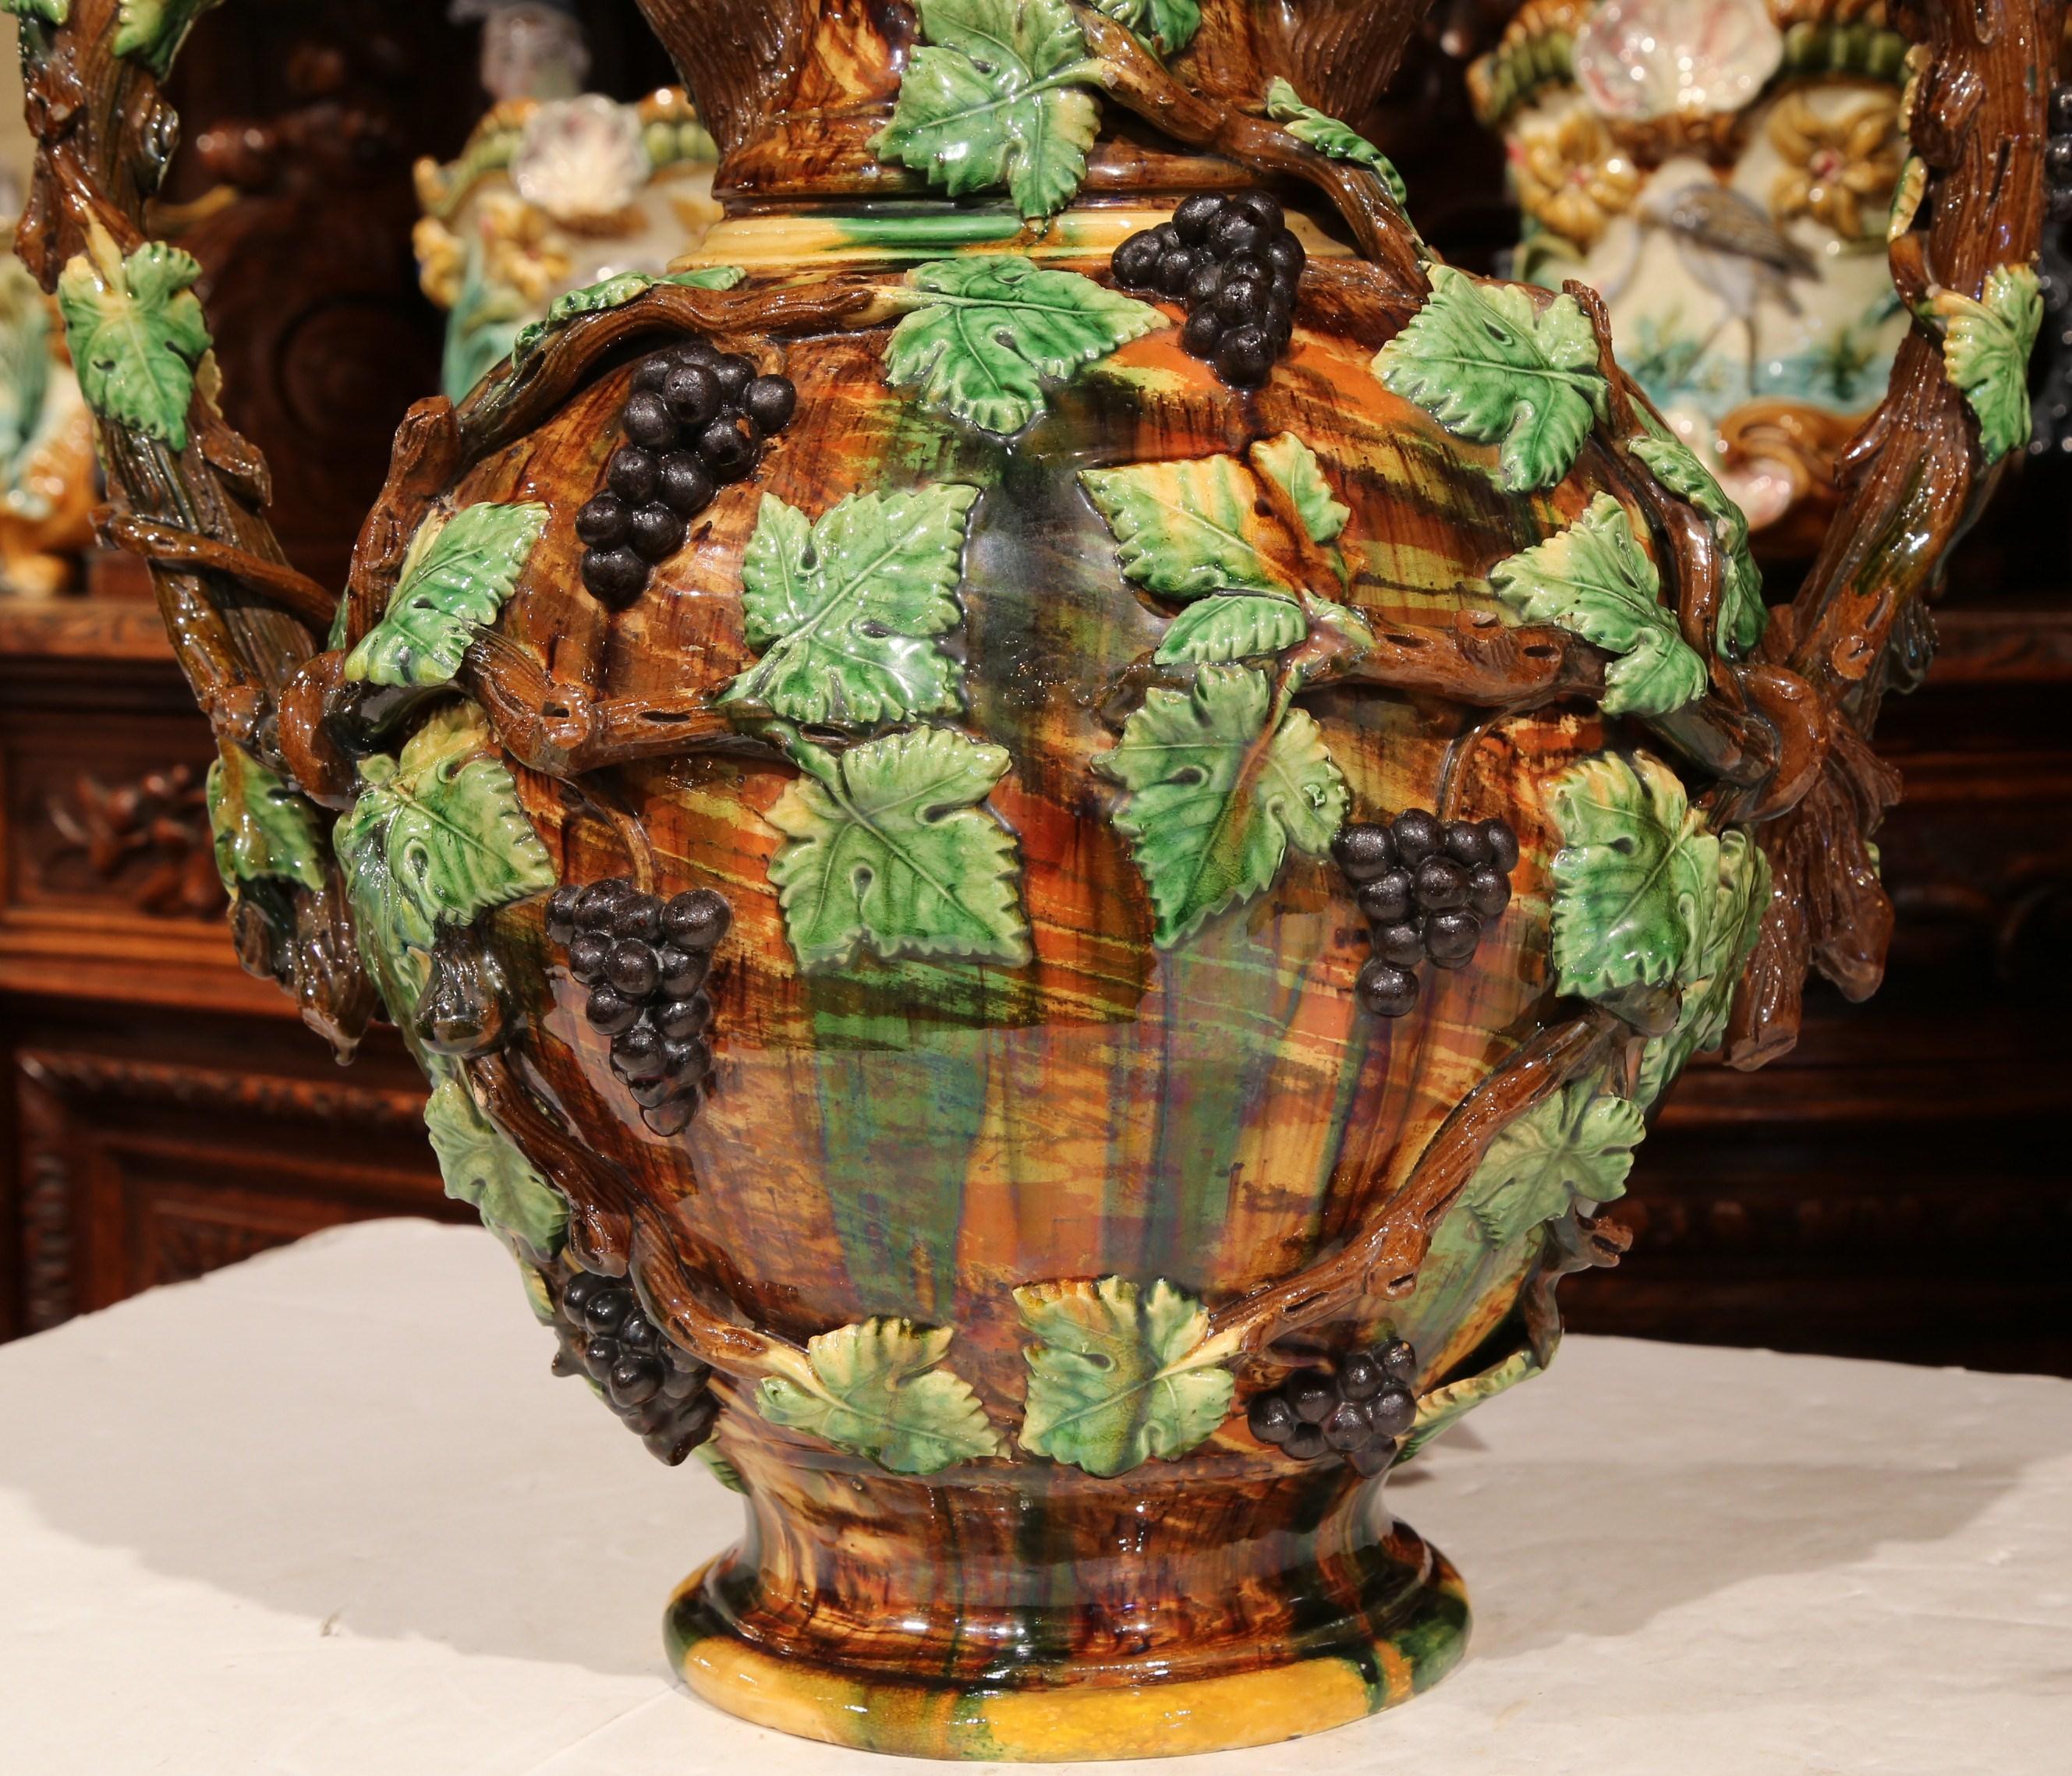 This large, antique hand painted ceramic wine jar was created in France, circa 1890. The tall vase with brown handles shaped like old vines, is embellished with colorful black grapes and green cabernet leaves in high relief. This colorful vessel is